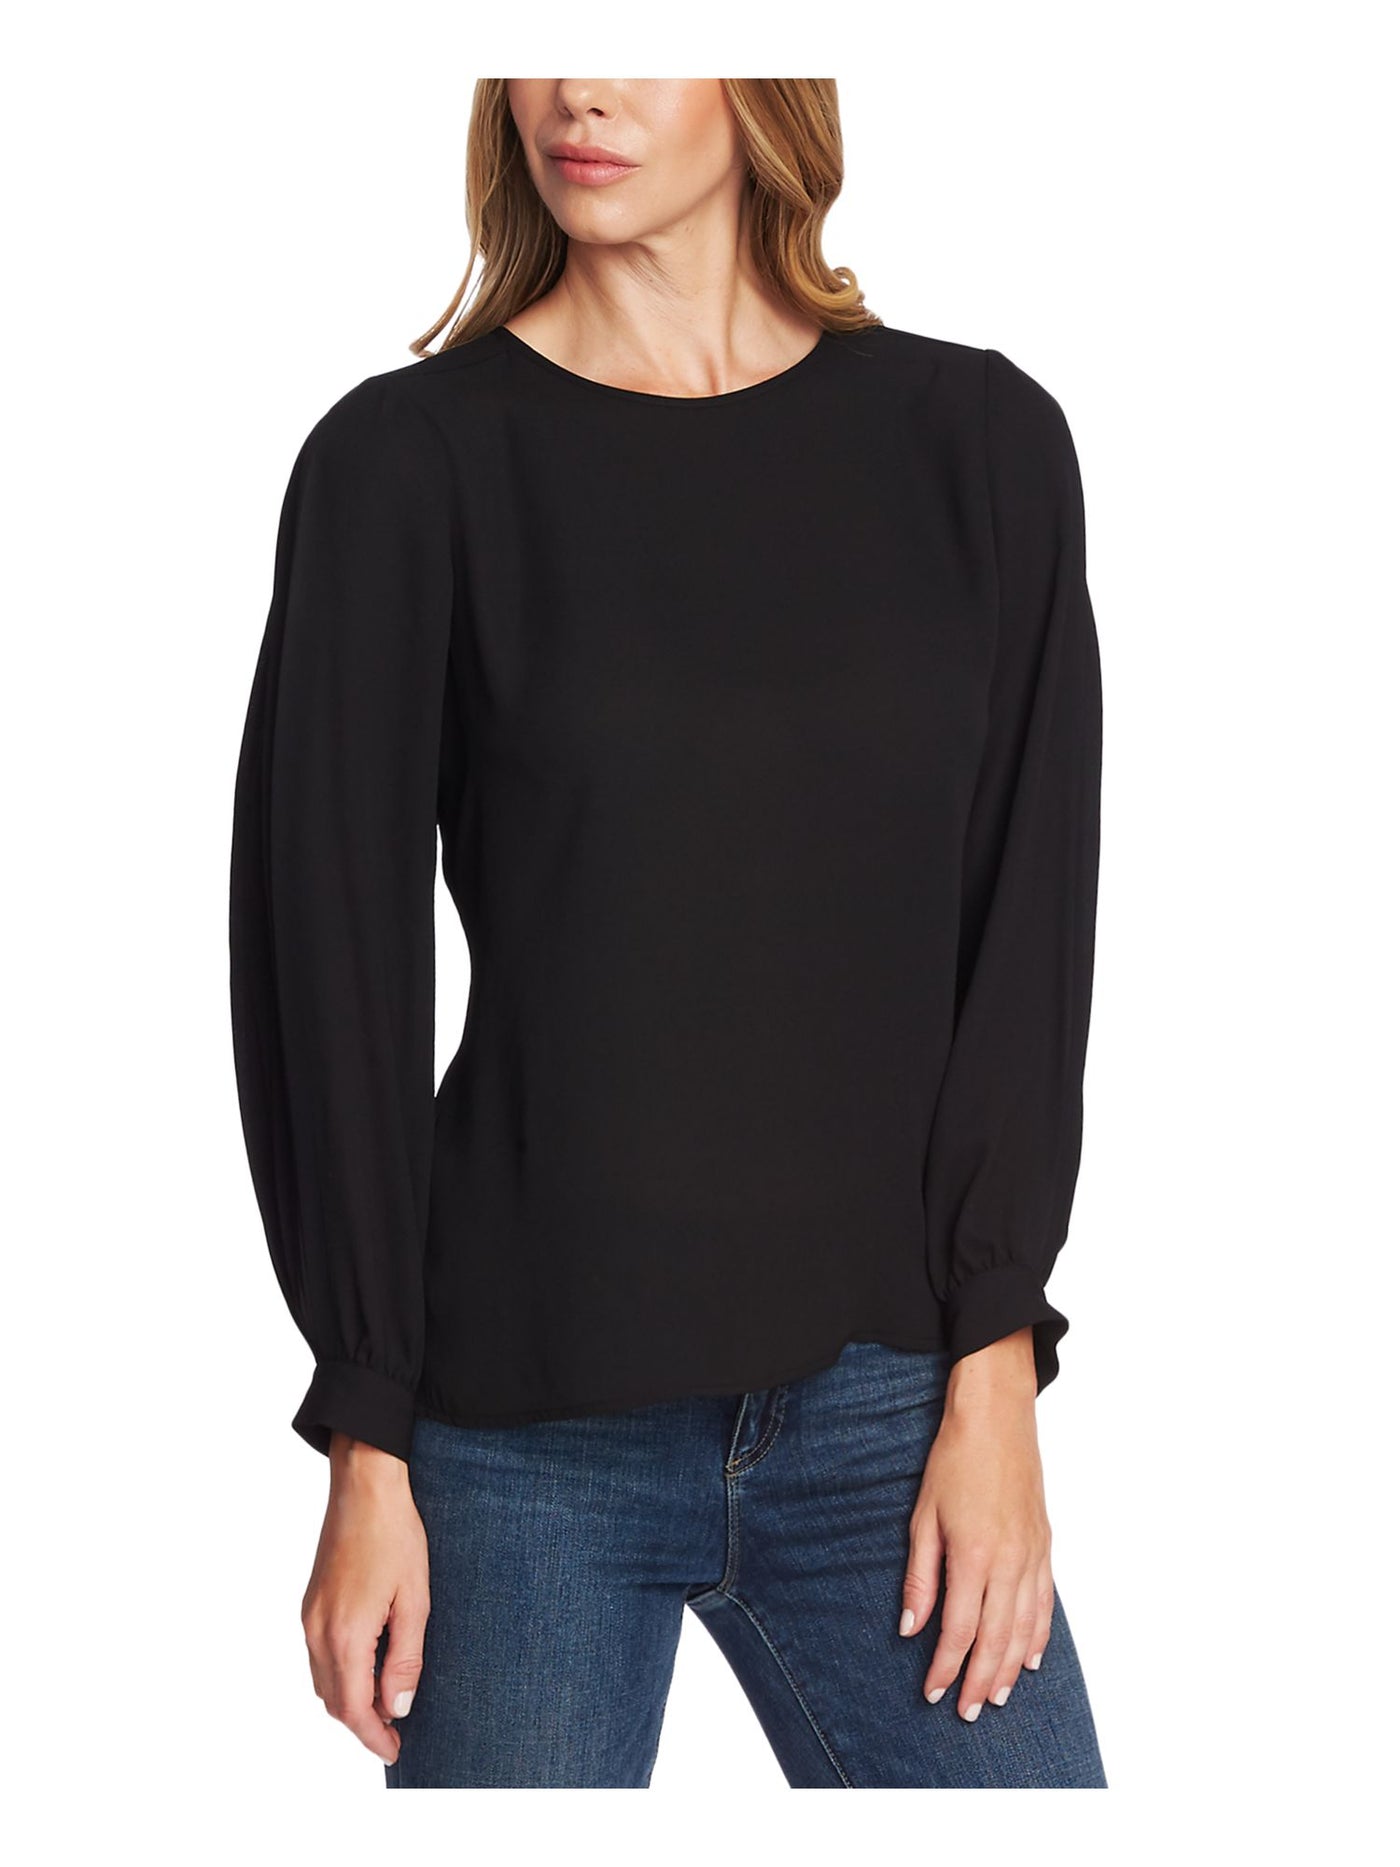 VINCE CAMUTO Womens Black Long Sleeve Jewel Neck Blouse S